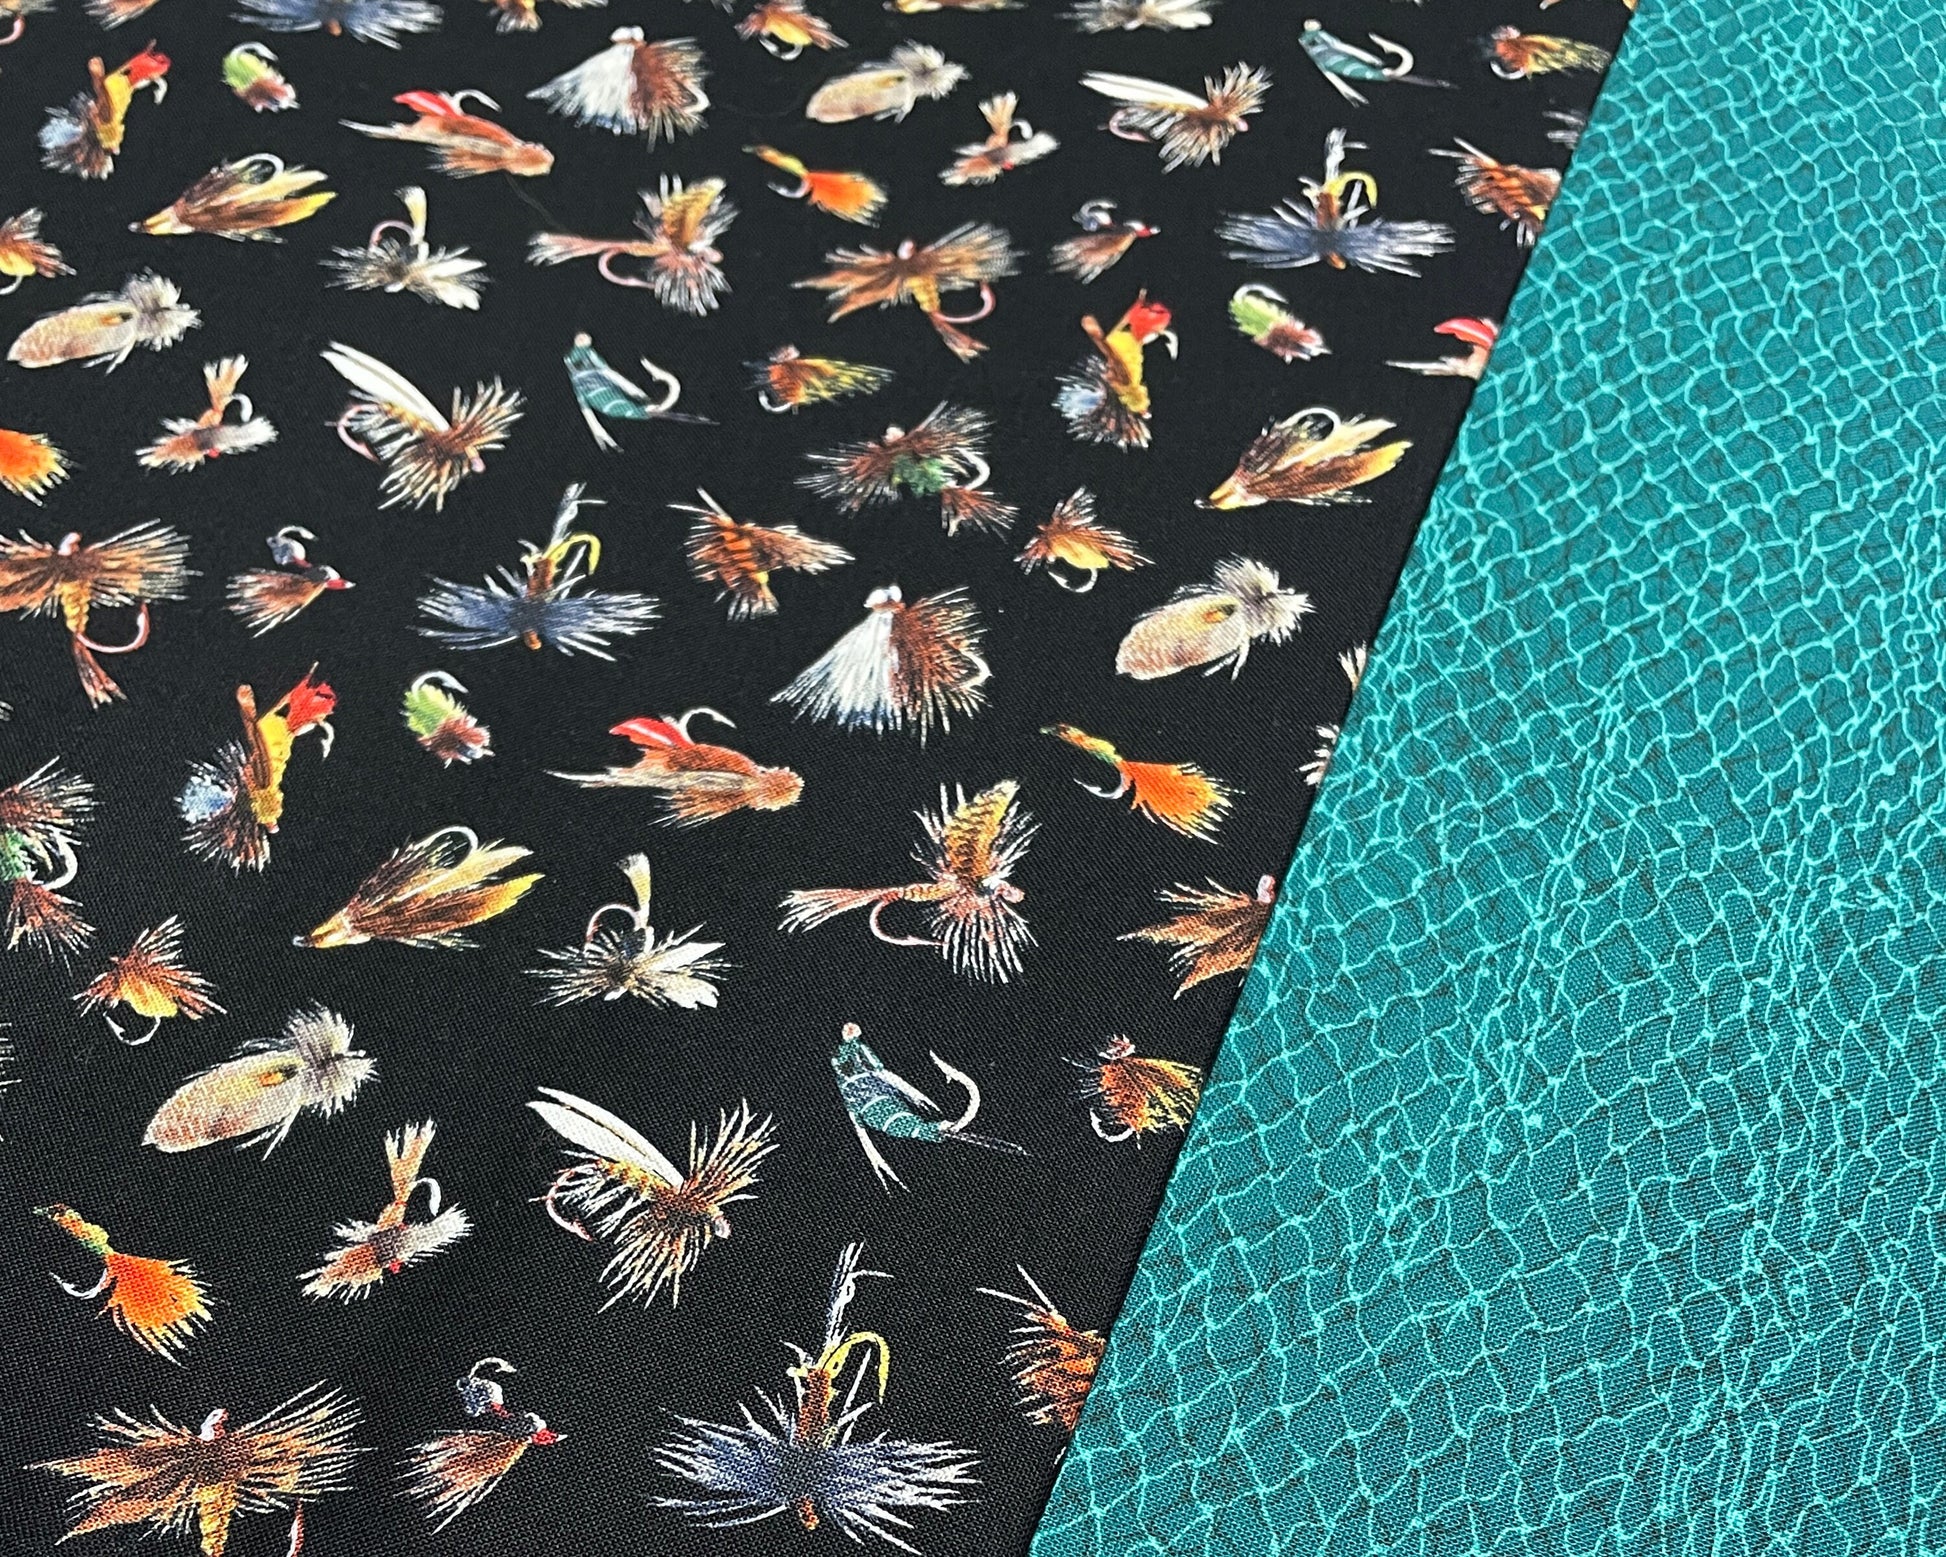 Fishing Net Cotton Fabric - Marine - Land and Sea collection by Katherine Quinn for Windham Fabrics - 100% Cotton Fabric - Ships NEXT DAY